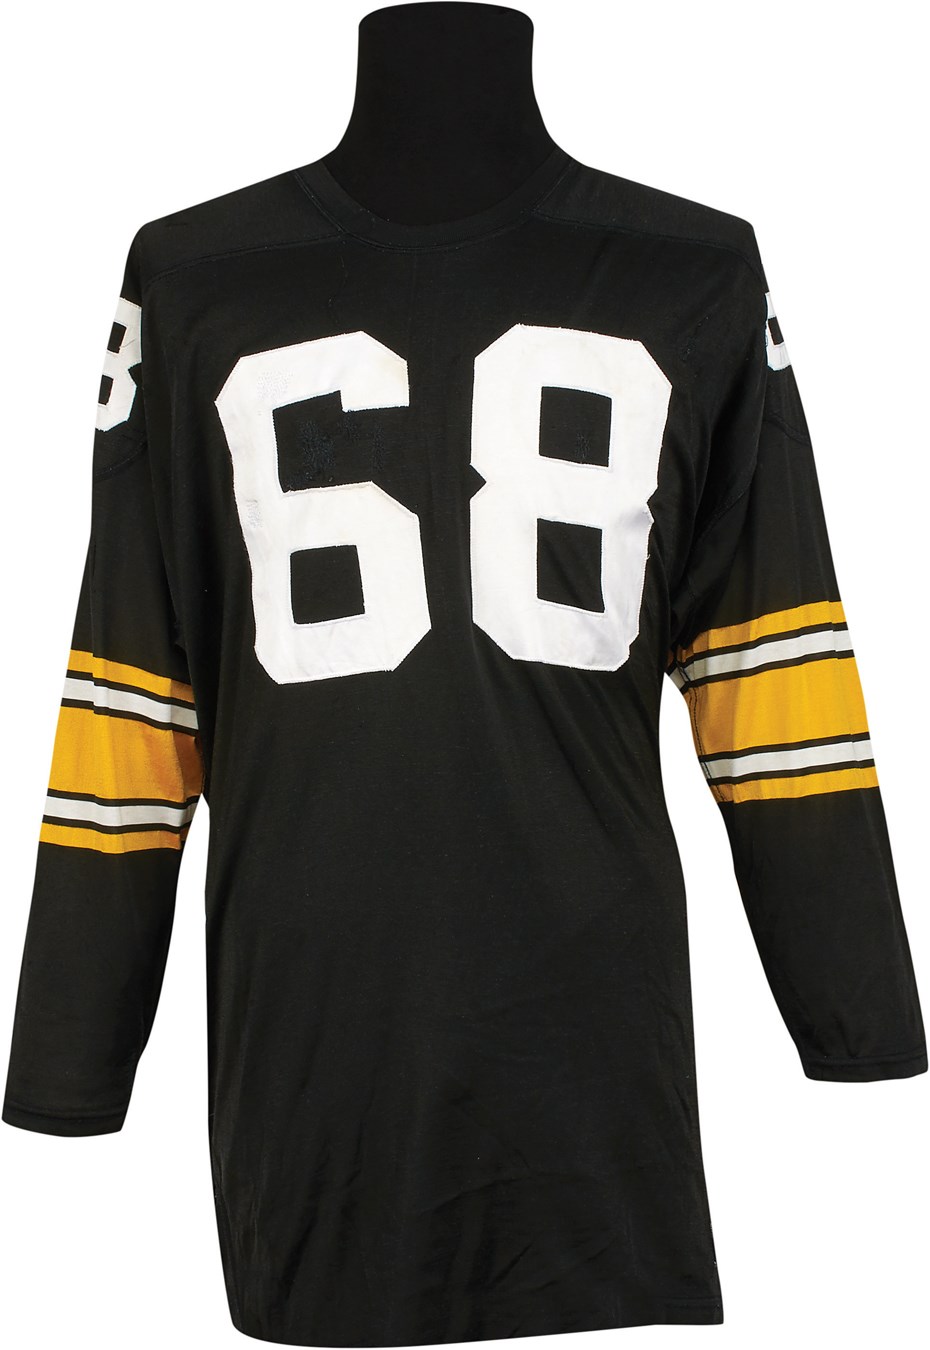 The Pittsburgh Steelers Game Worn Jersey Archive - 1973 L.C. Greenwood Pittsburgh Steelers Game Worn Jersey (Photomatched)